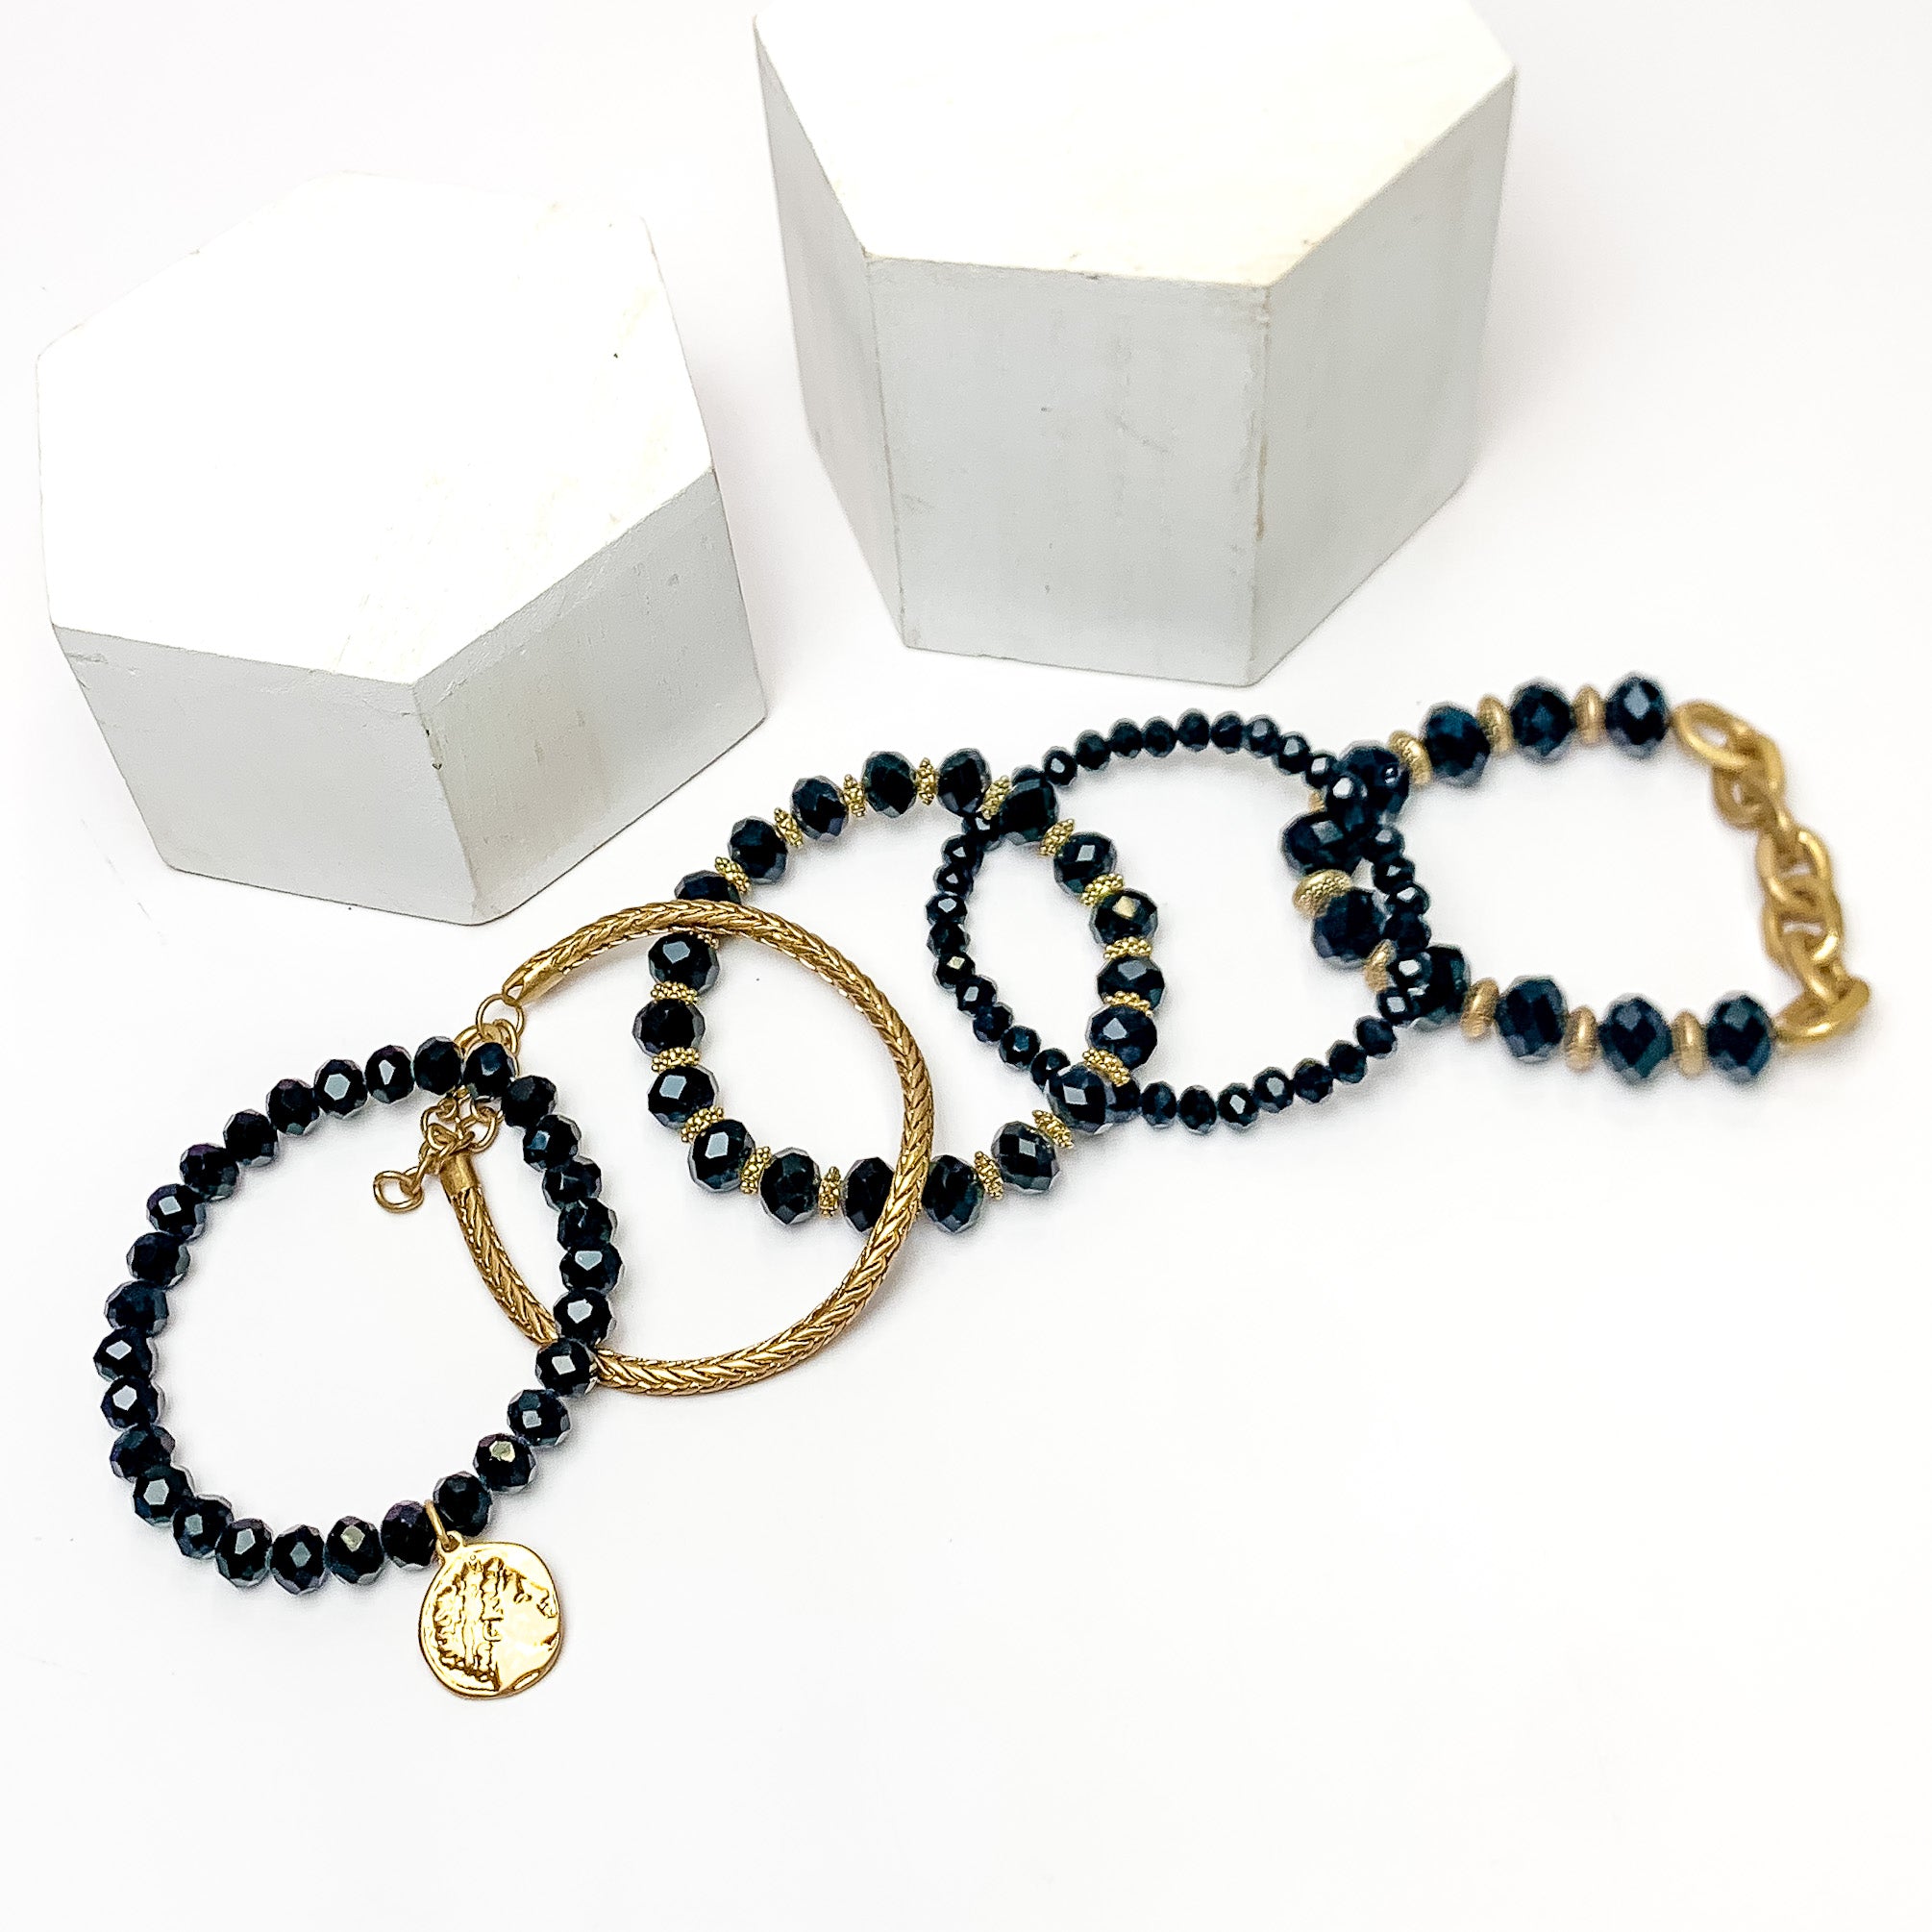 Set of Five | City Dreamer Gold Tone Bracelet Set in Black. Pictured on a white background with two white podiums behind the bracelets.